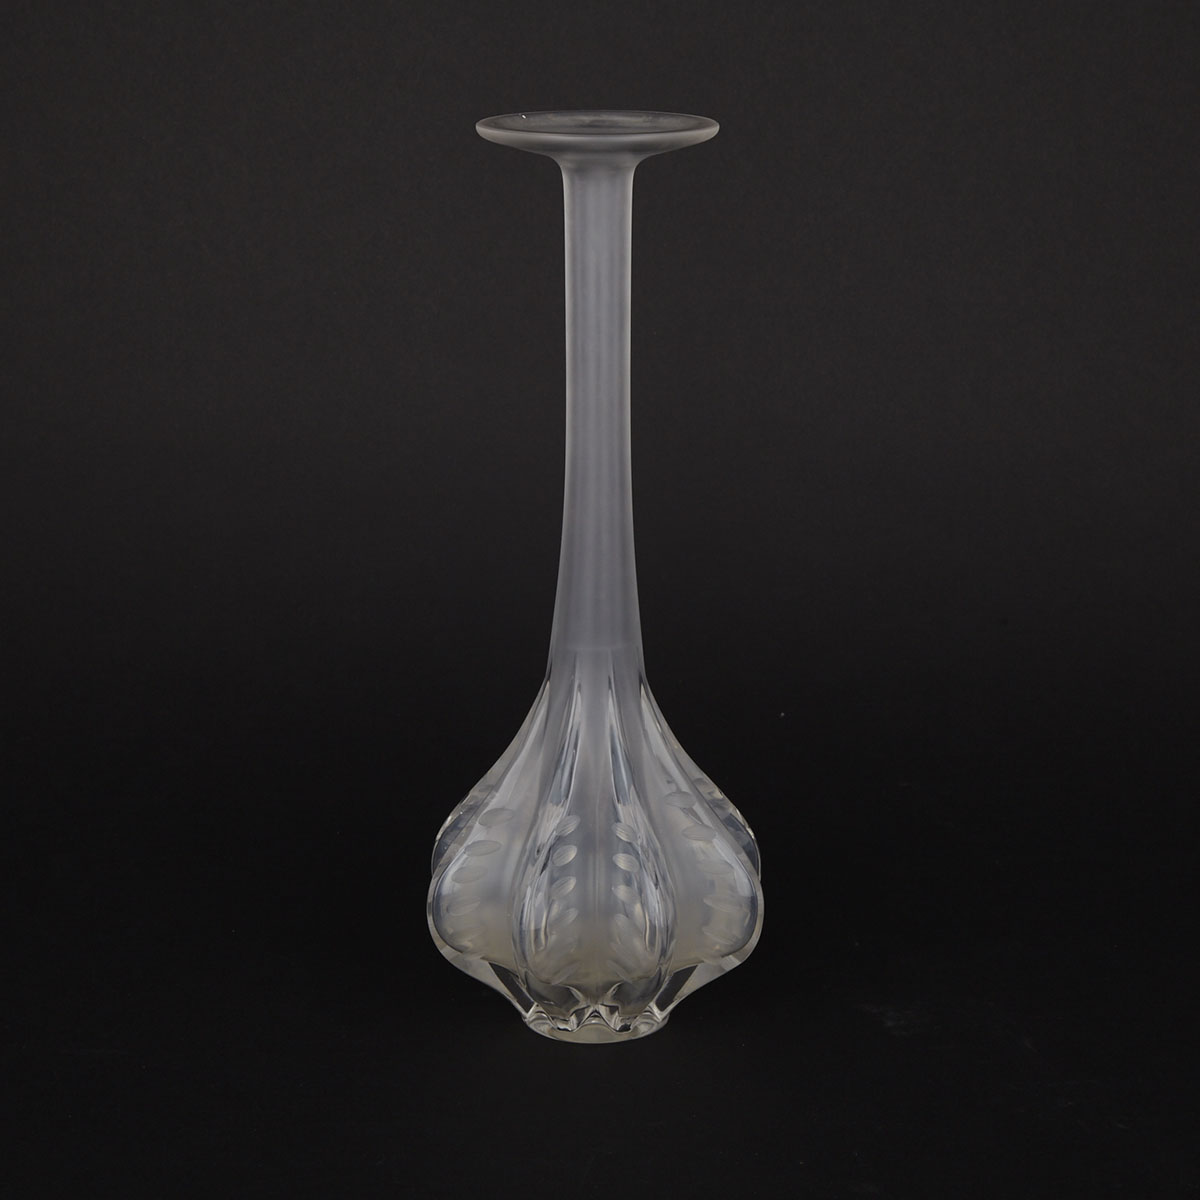 ‘Claude’, Lalique Moulded, Partly Frosted and Engraved Glass Vase, 20th century